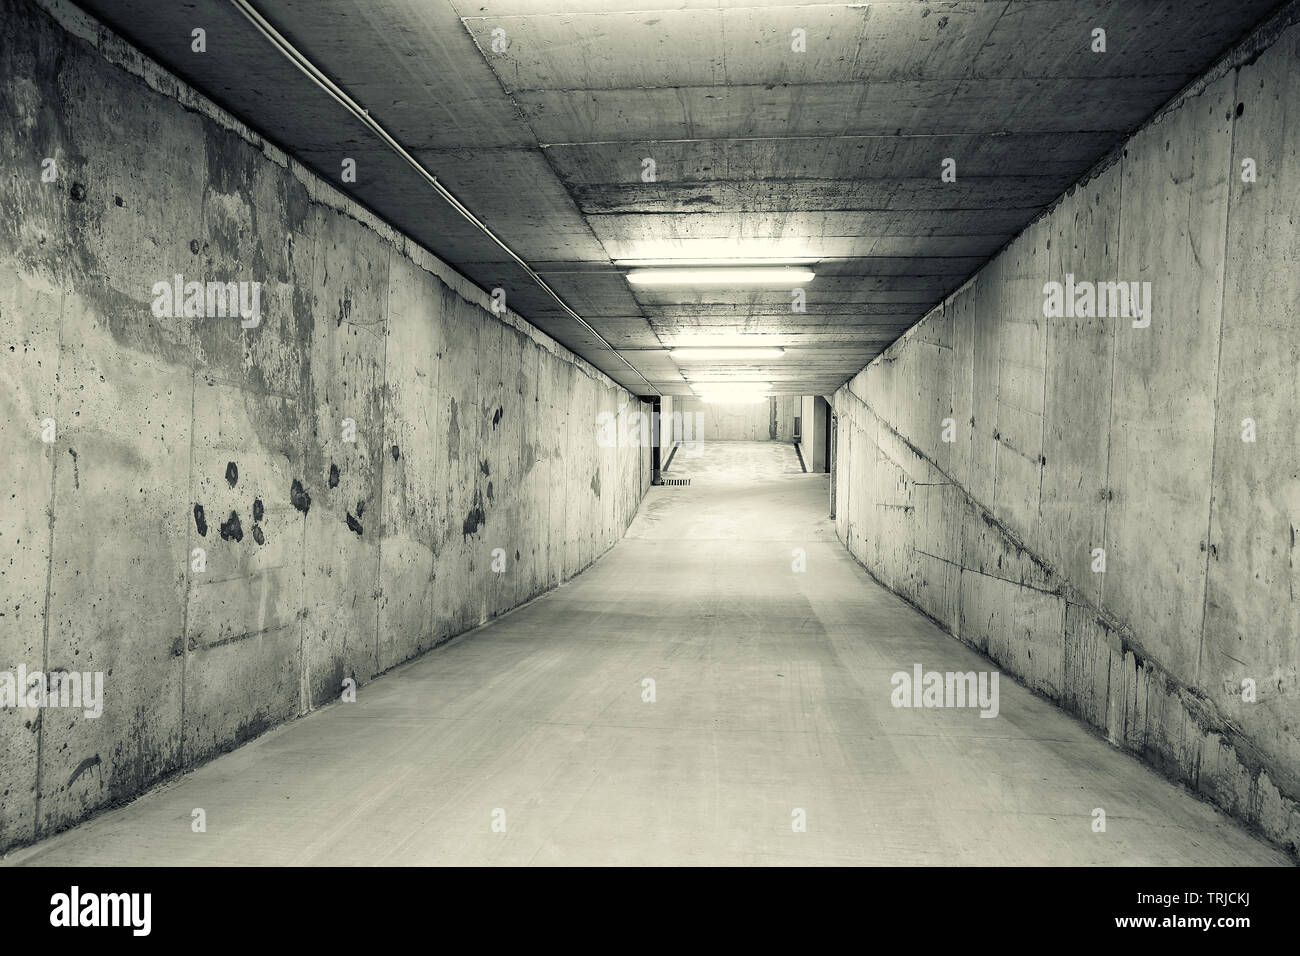 Empty, tunnel like downhill ramp of an underground car parking. Black and white image Stock Photo